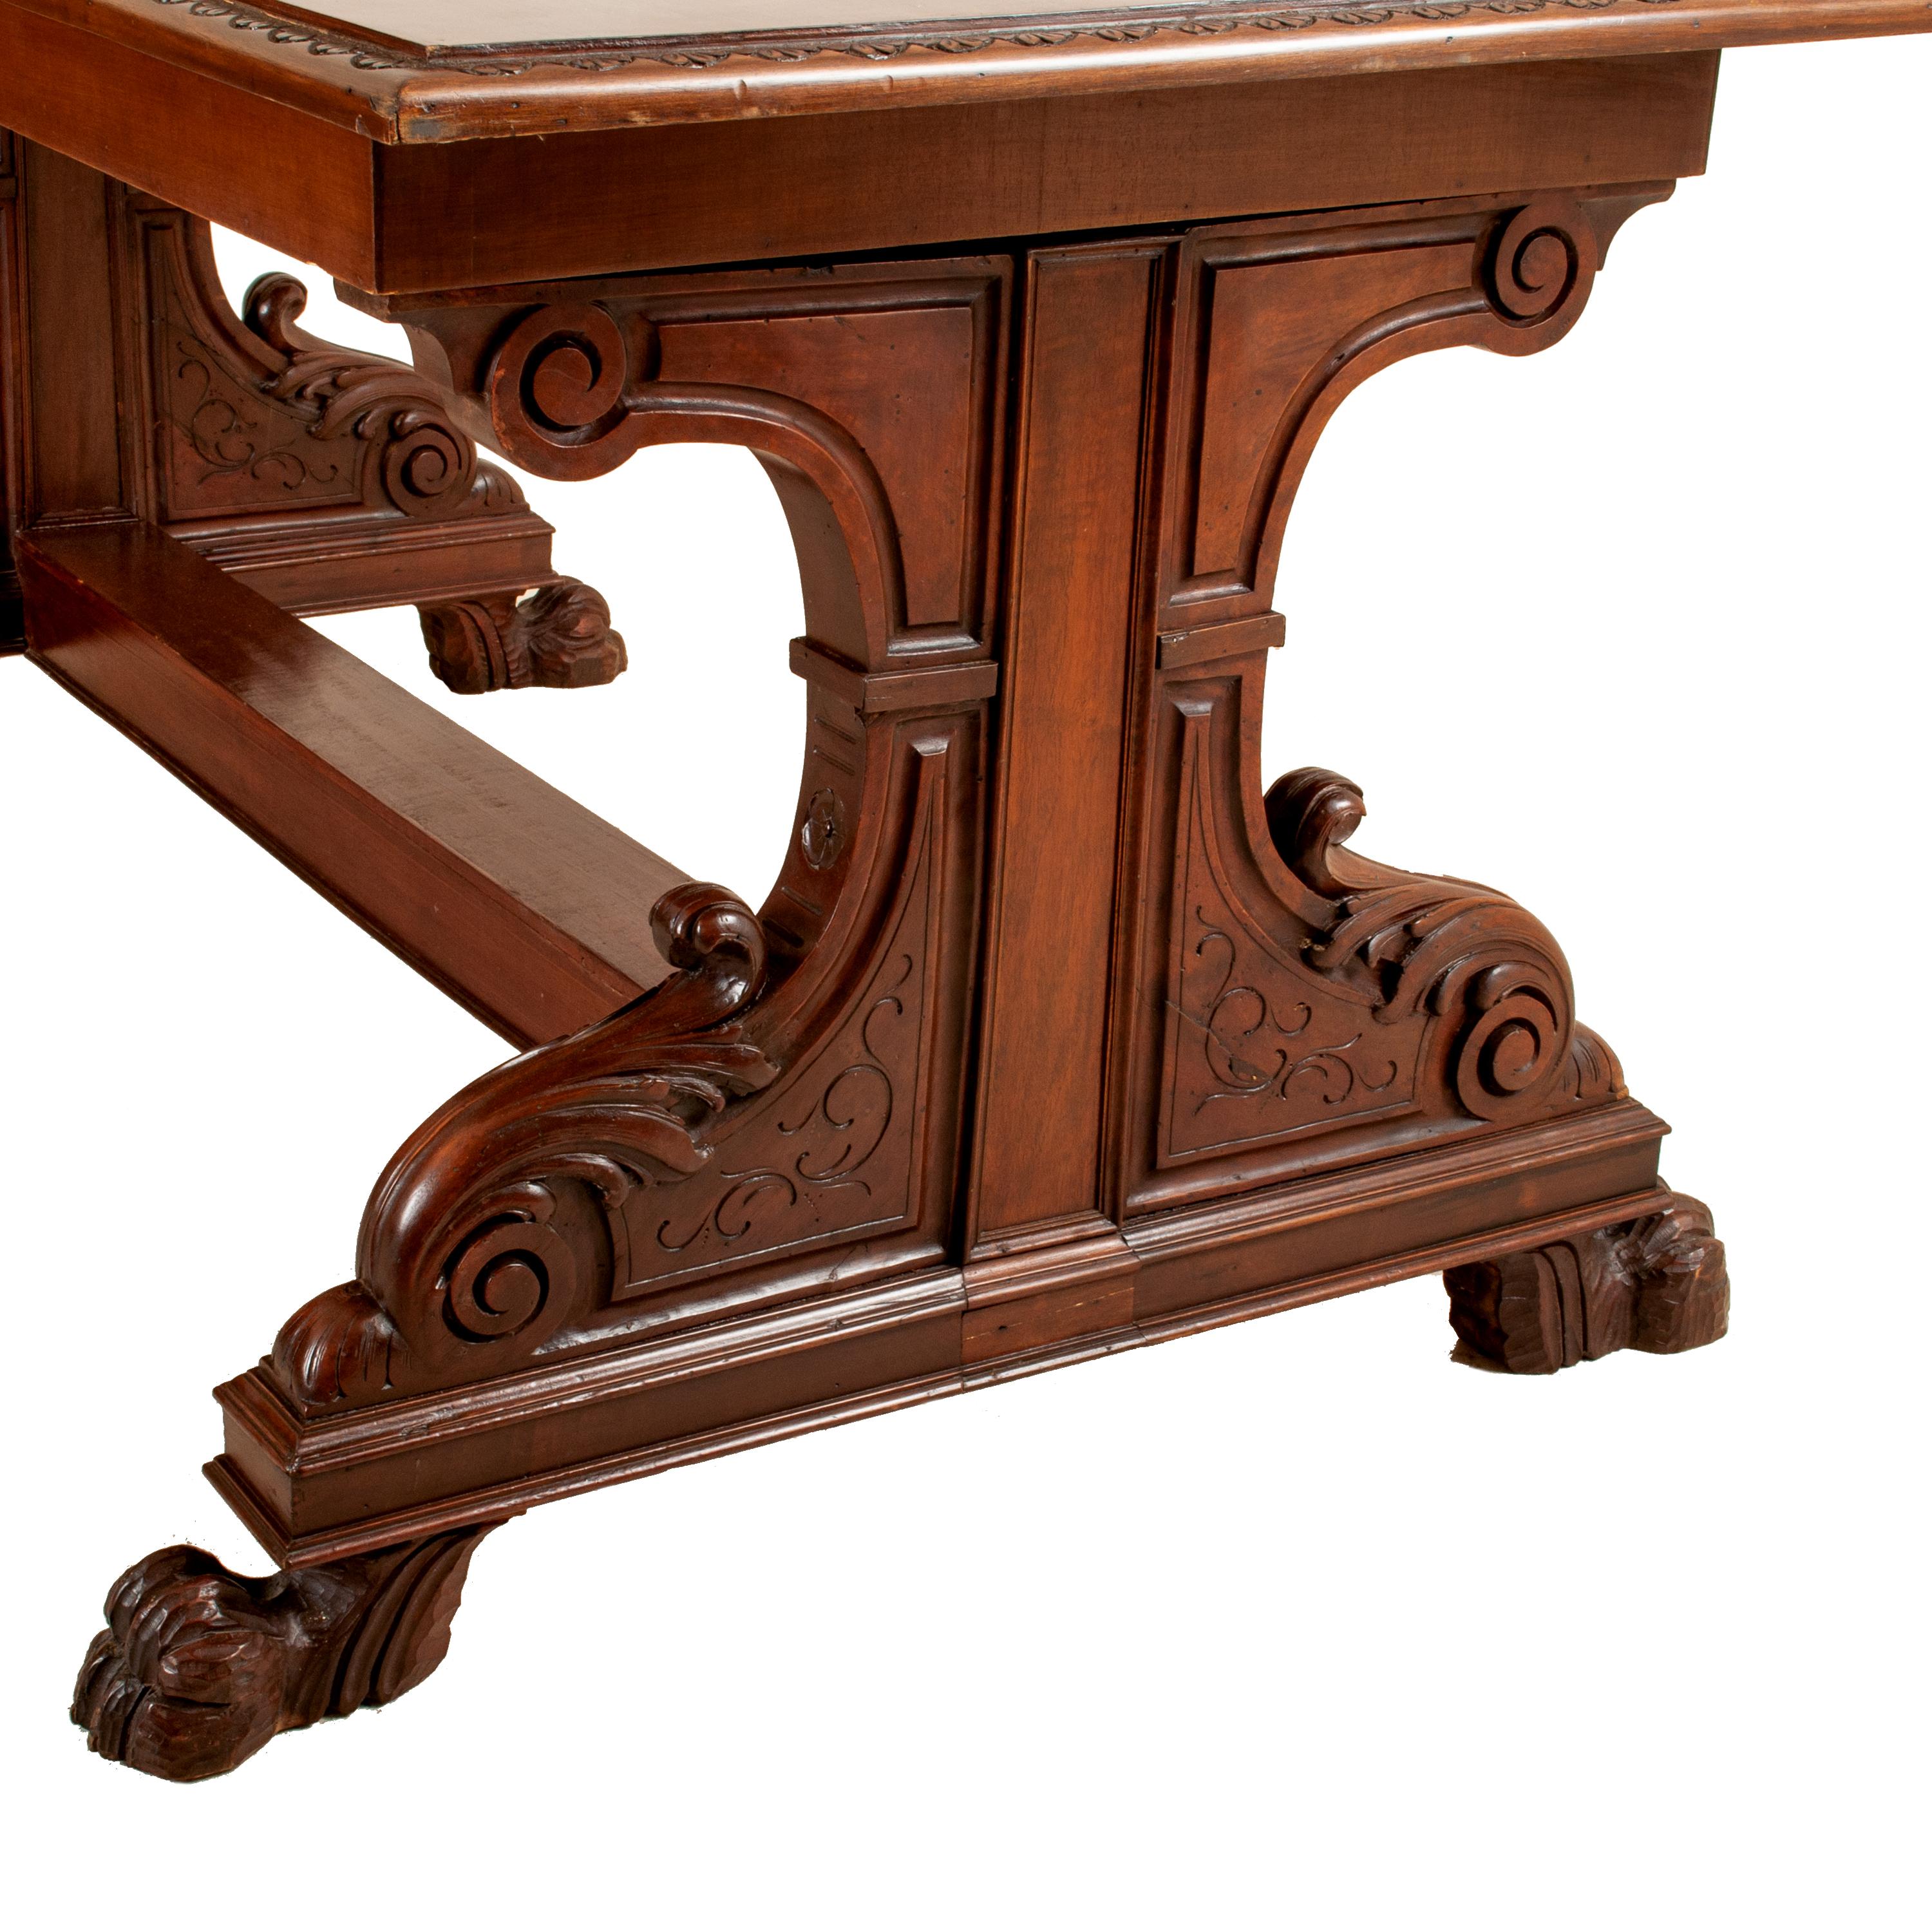 Antique Italian Carved Walnut Renaissance Revival Library Serving Table, 1870 For Sale 3